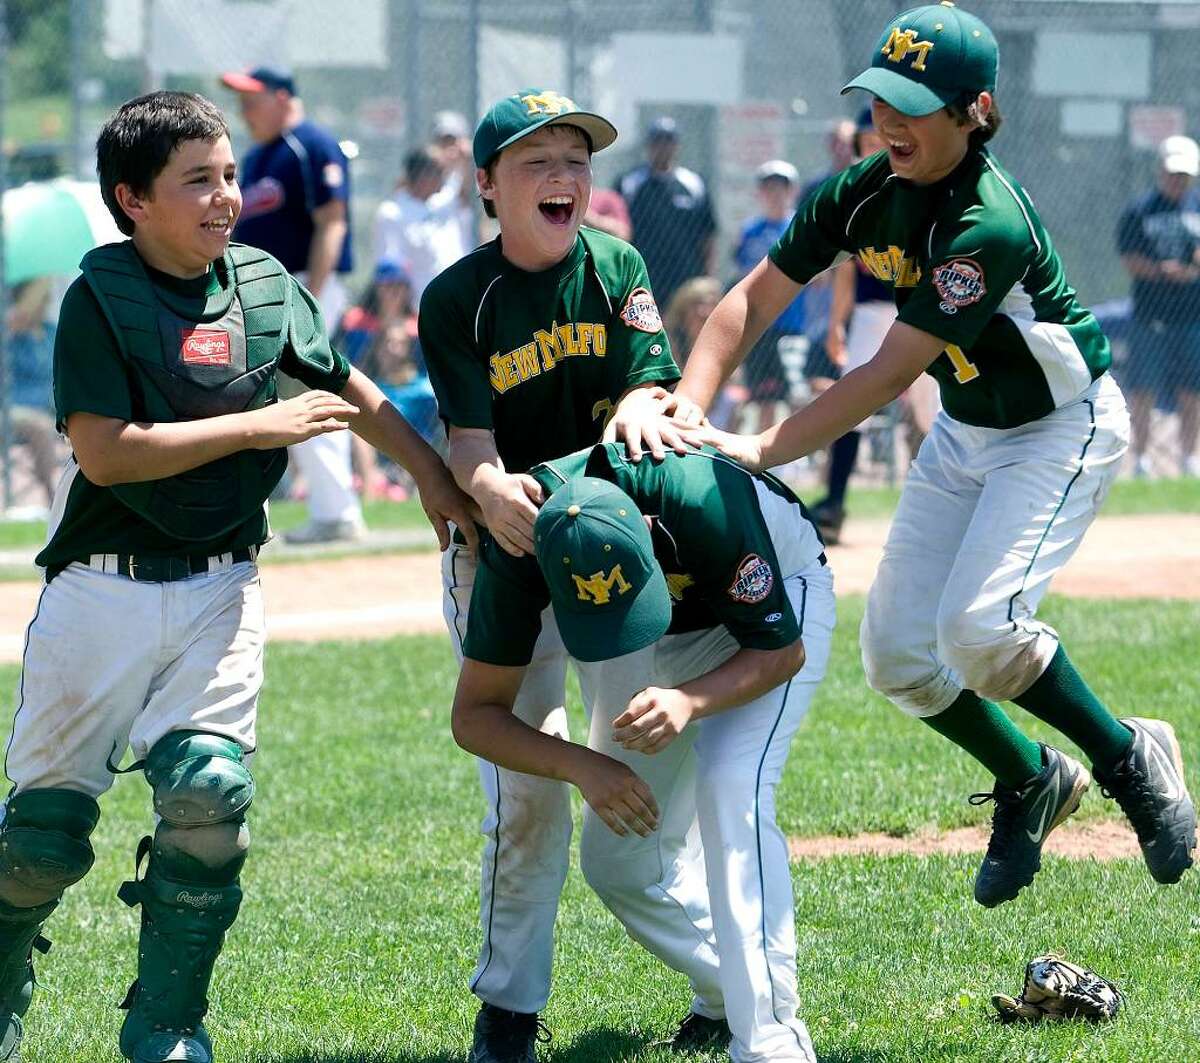 SPECTRUM/New Milford players, back row, left to right, Robert Mosso, Brendan Profita and Tim Gesualdi, celebrate with Tyler Hansen, who pitched the last three innings for the New Milford Youth Baseball/Softball 11-year-olds in the state championship game vs. Danbury. New Milford defeated Danbury, 10-6, to win the Cal Ripken 11-year-old state tournament championship July 31, 2010 at Rogers Park.